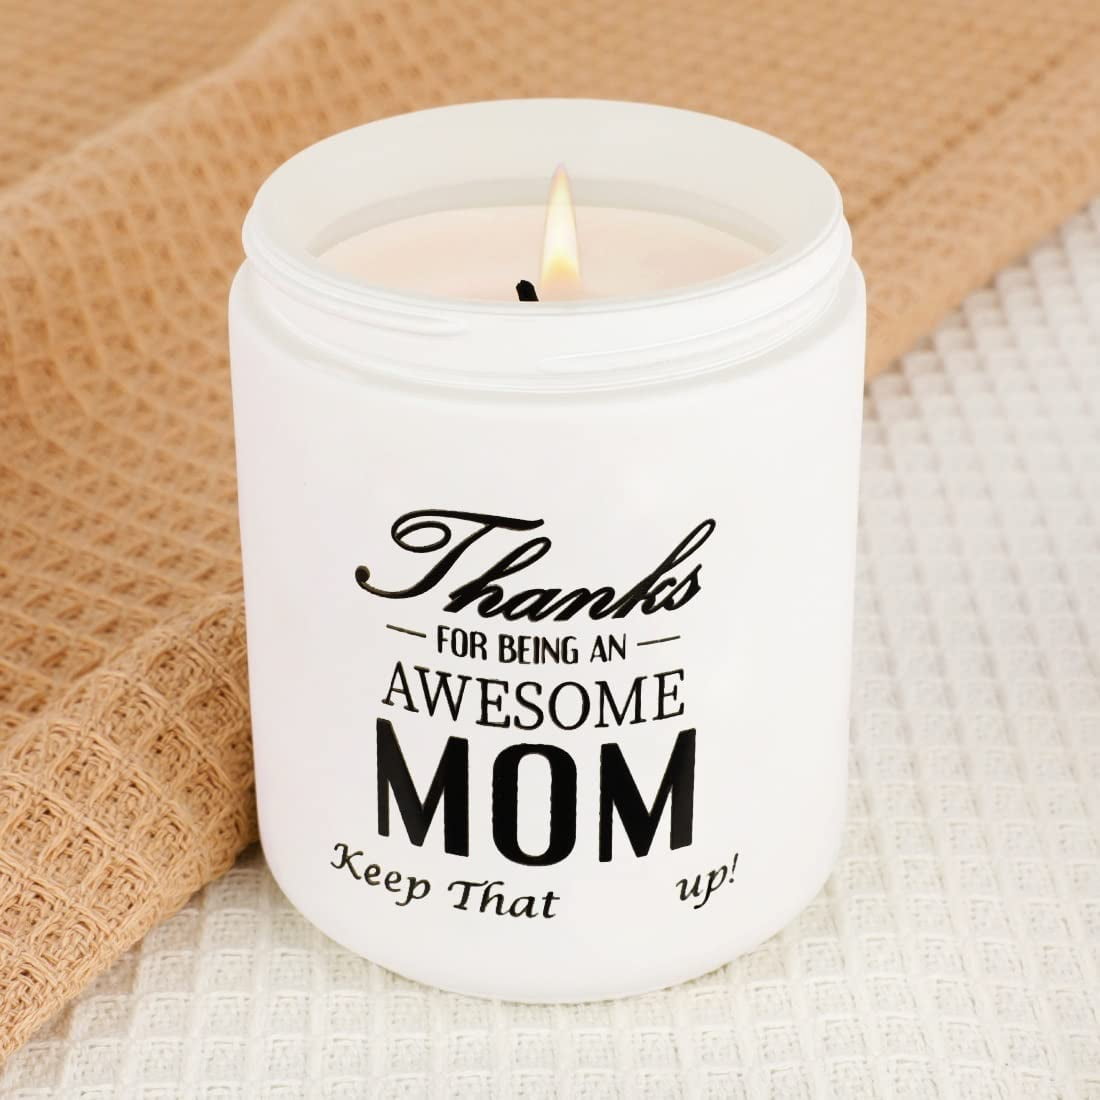 aoselan Gifts for Mom from Daughter, Son - Funny Mom Gifts - Mom